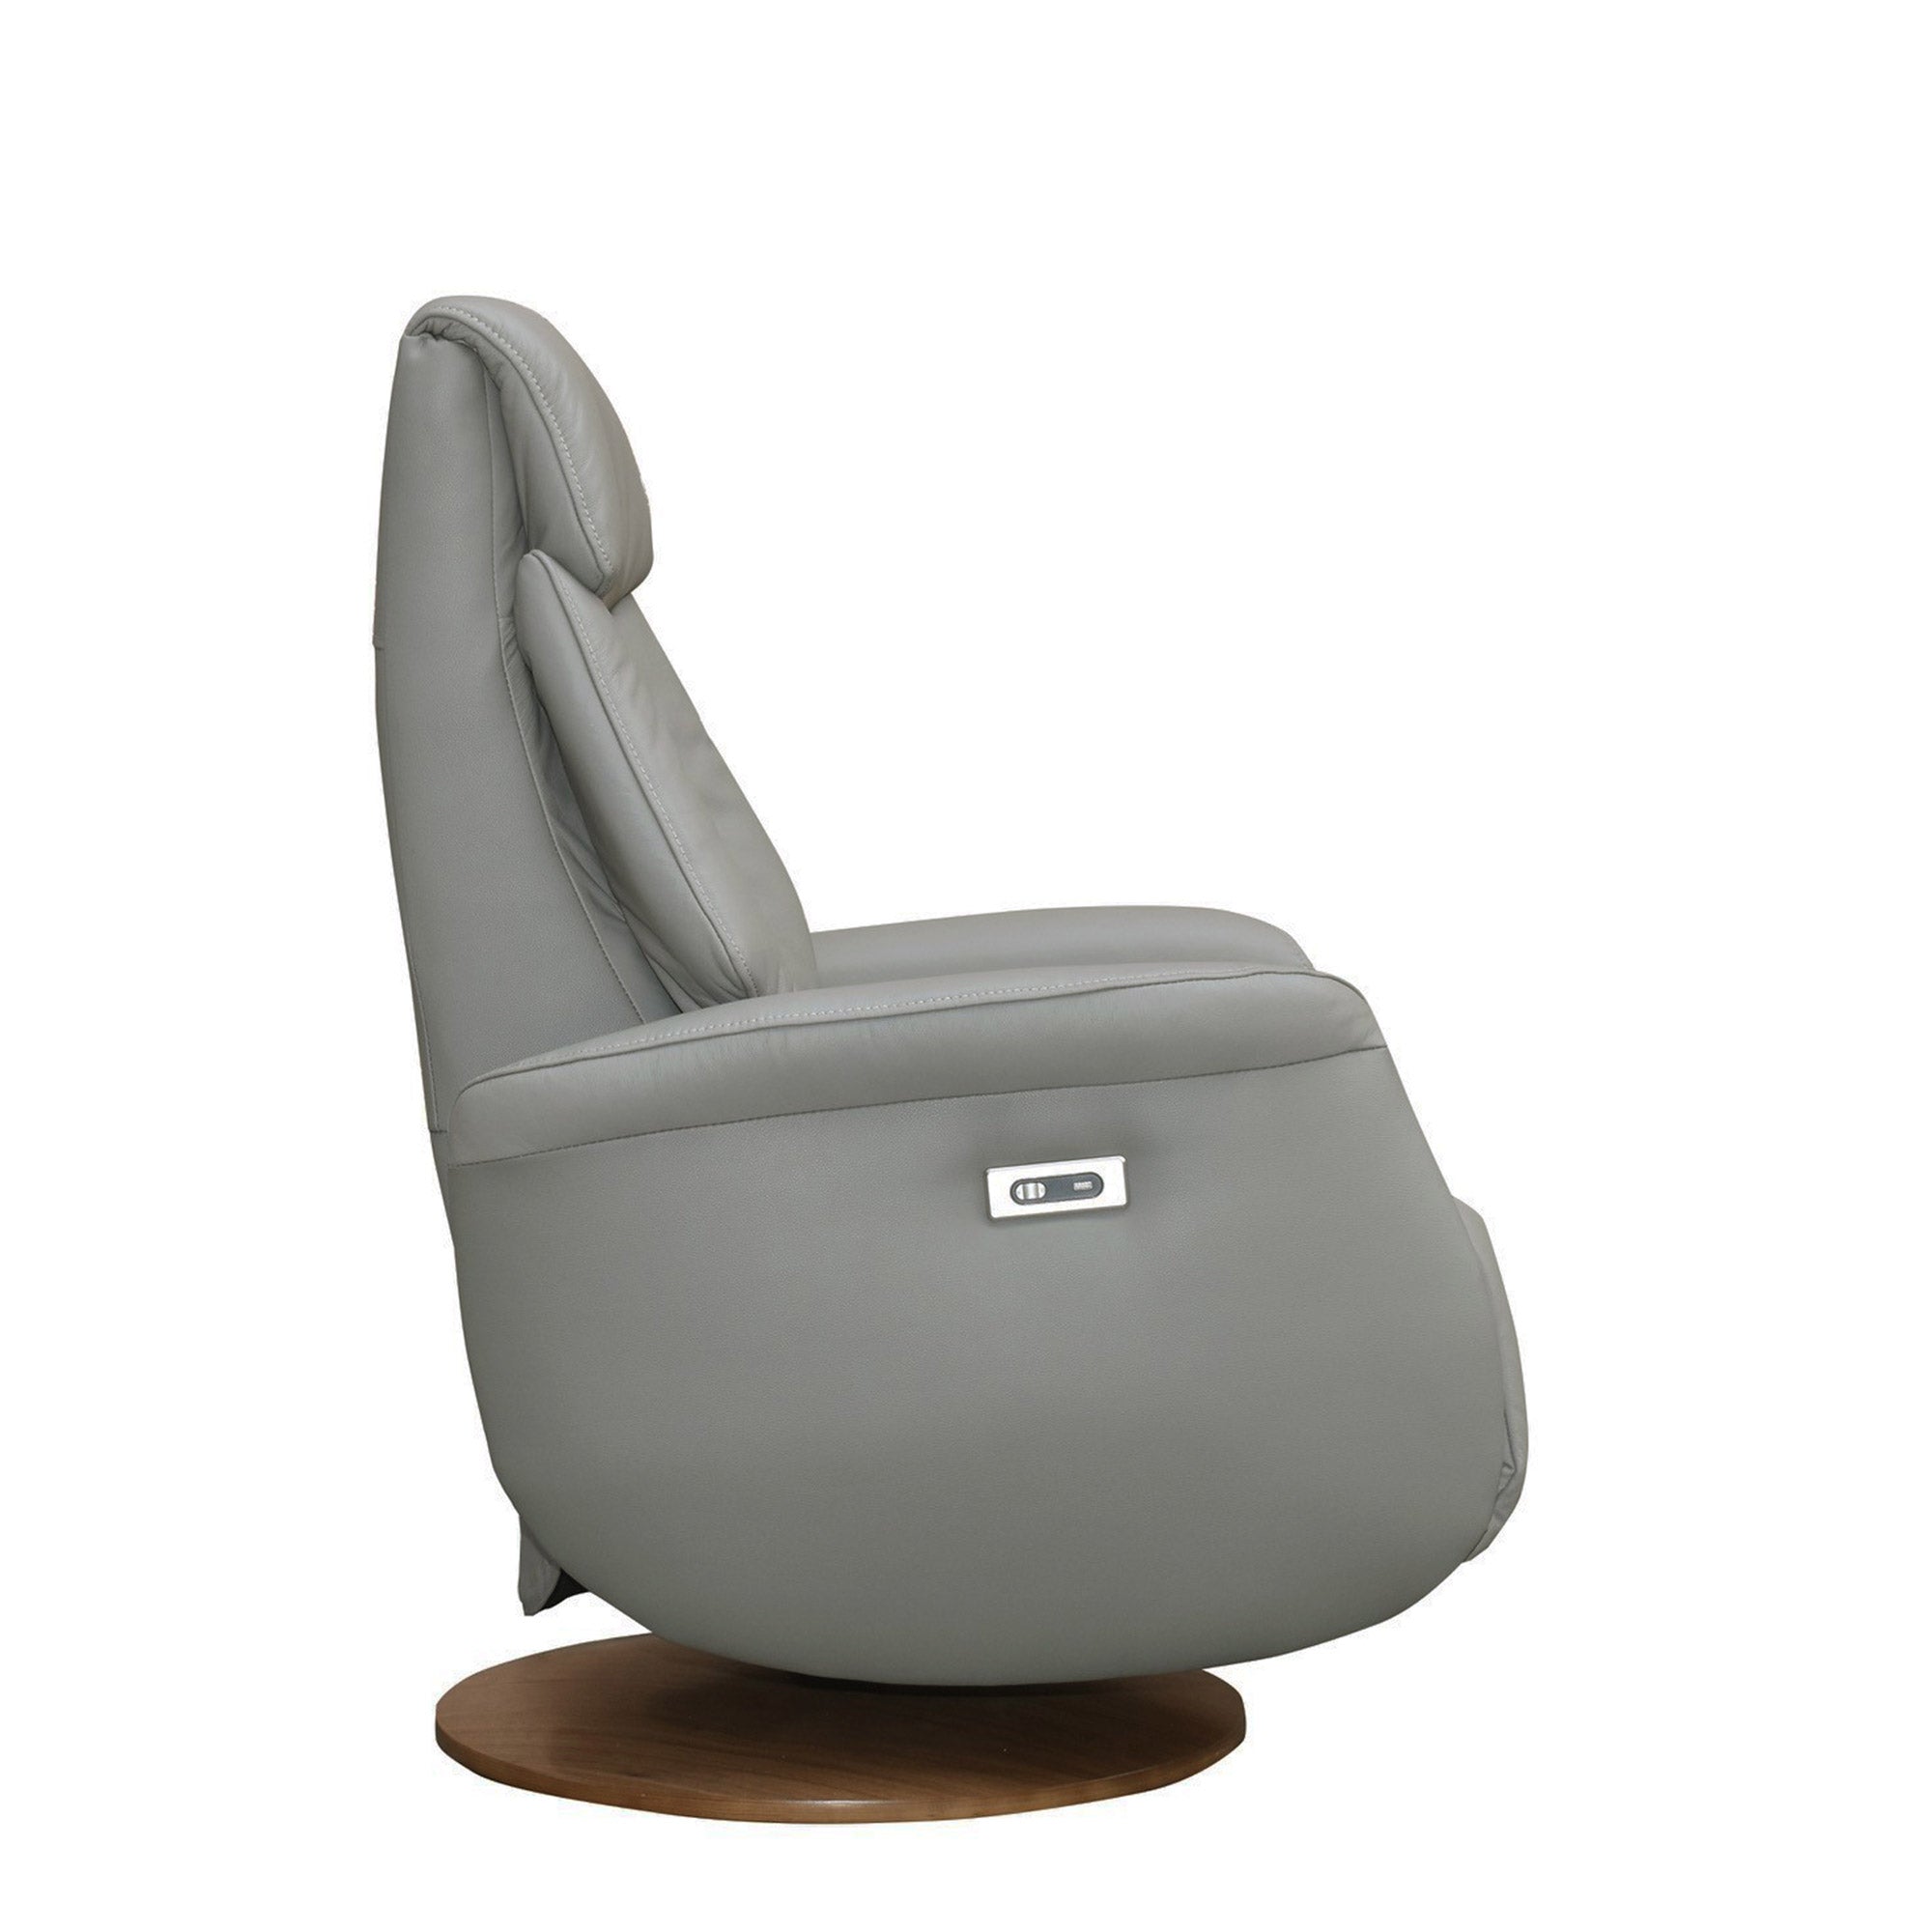 Malmo - Power Recliner Swivel Chair In Leather/PU Husky With Round Walnut Base